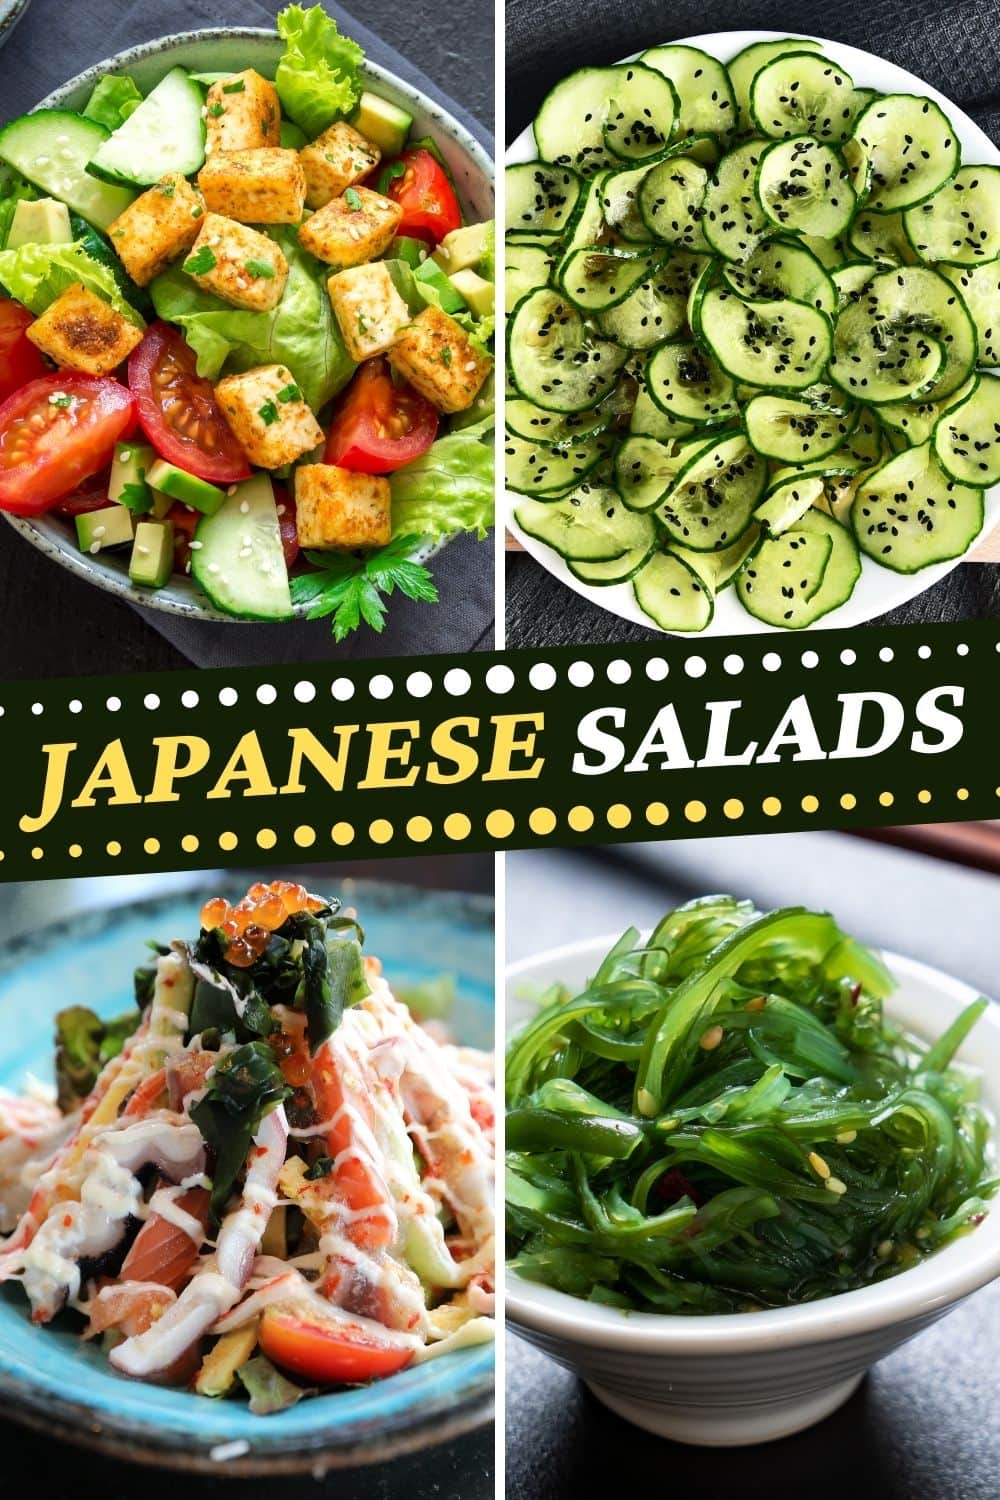 17 Traditional Japanese Salads - Insanely Good